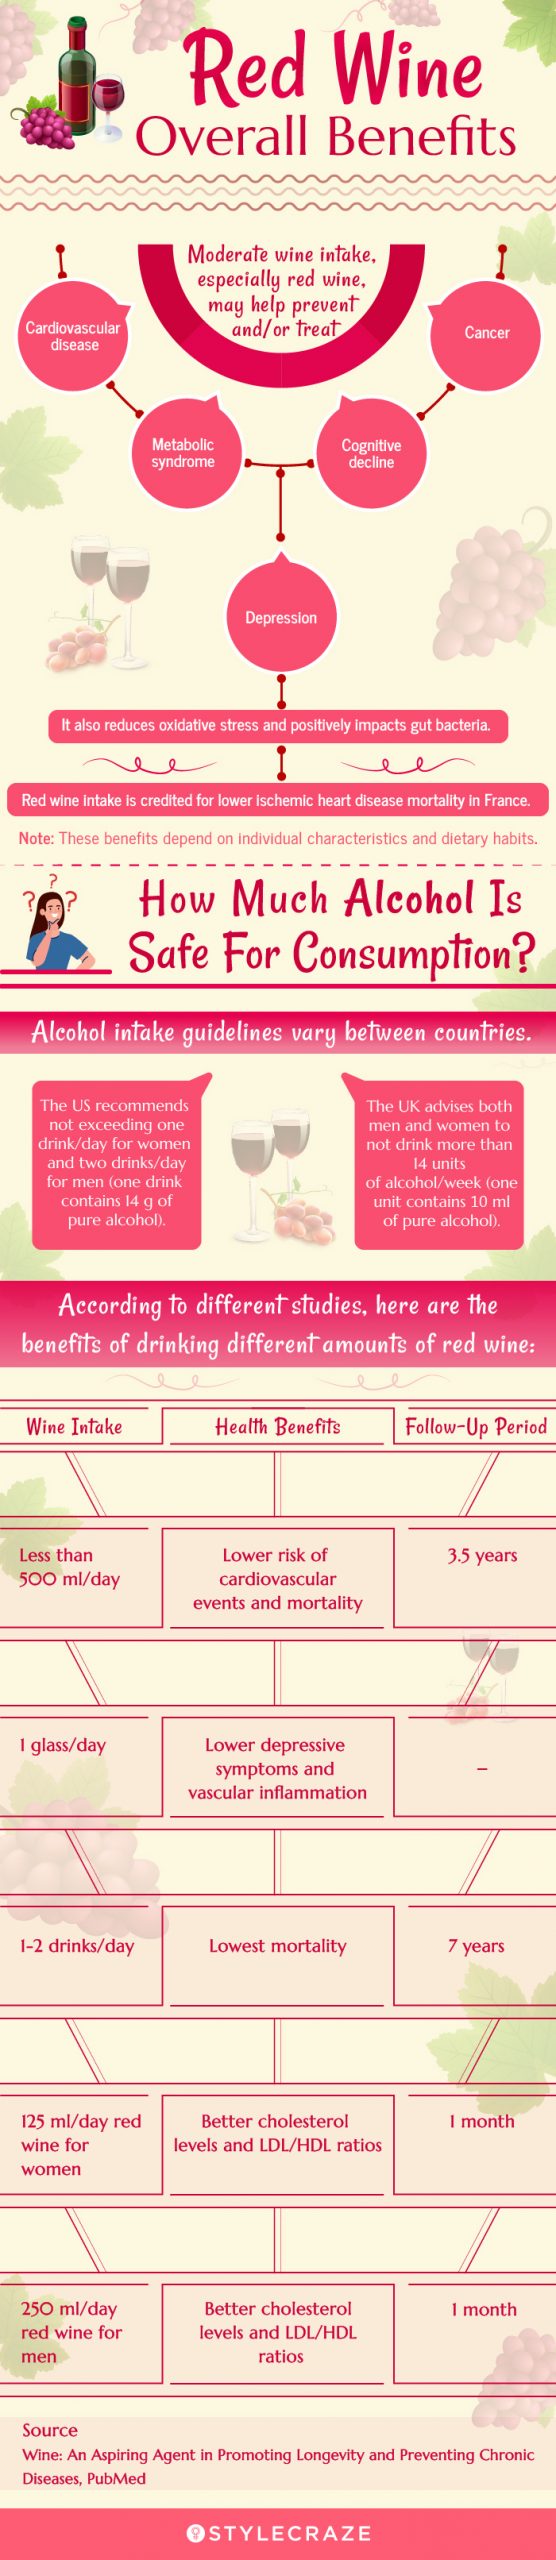 red wine for weight loss [infographic]